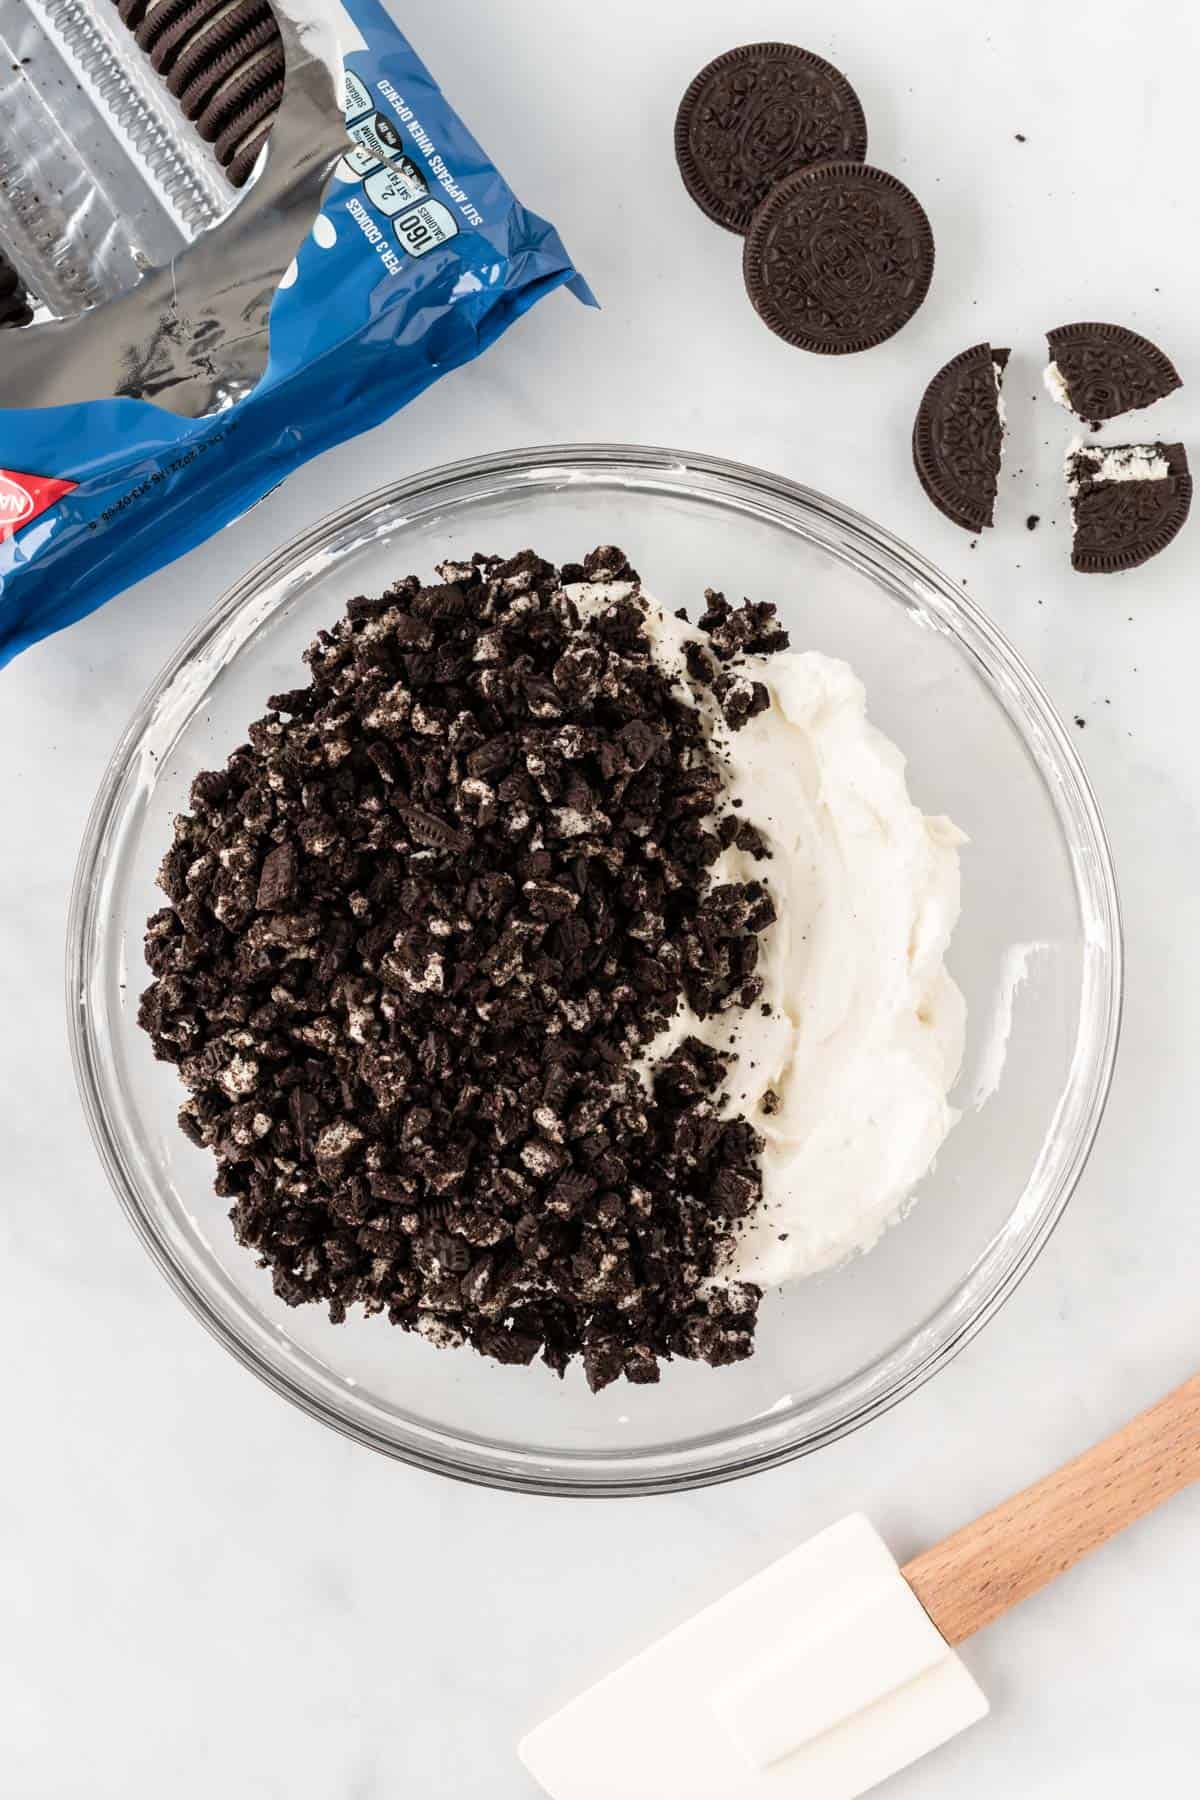 adding crushed oreos to the pie batter